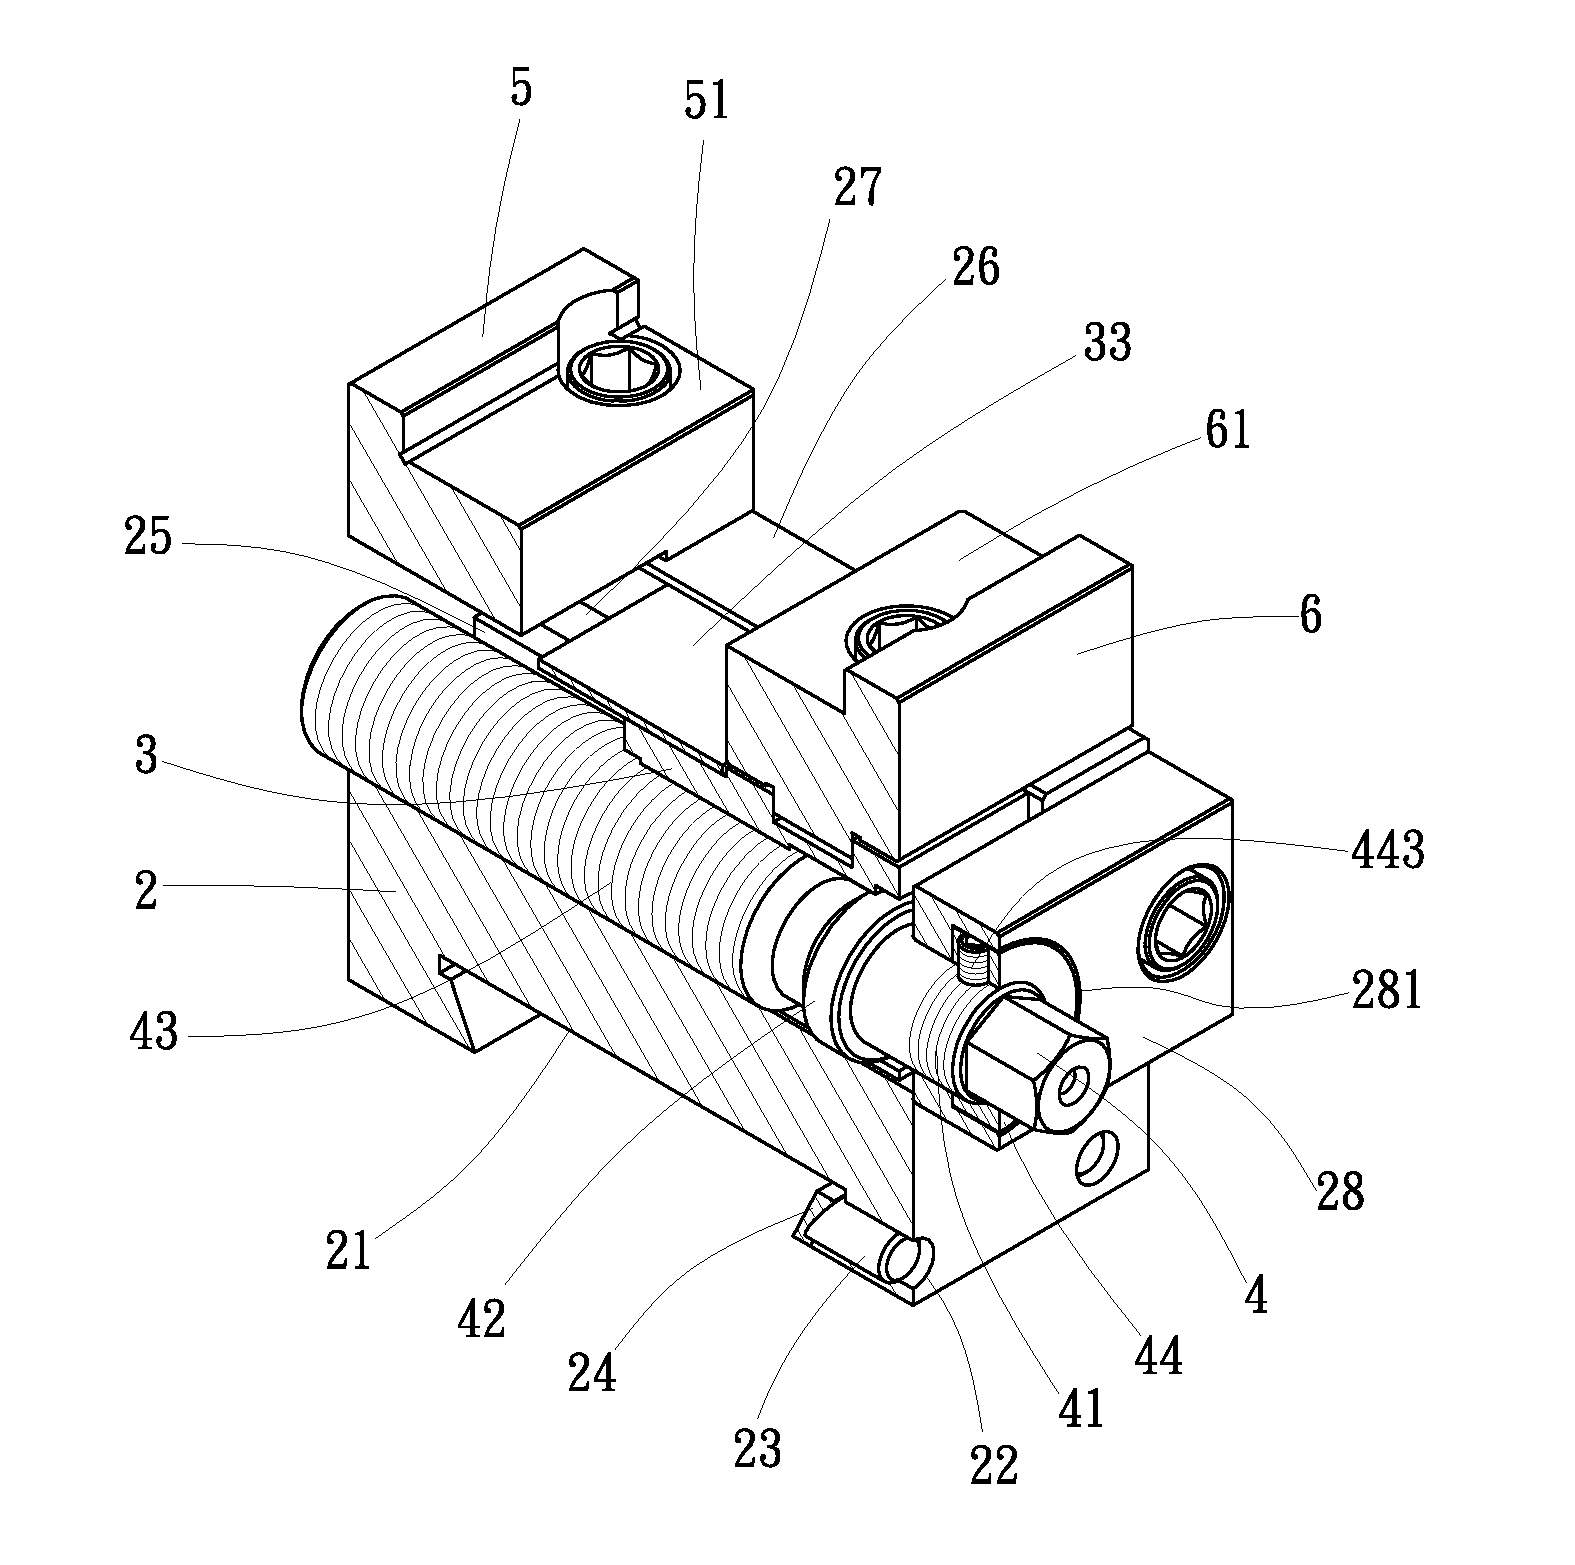 Micro-adjustable parallel bench vise